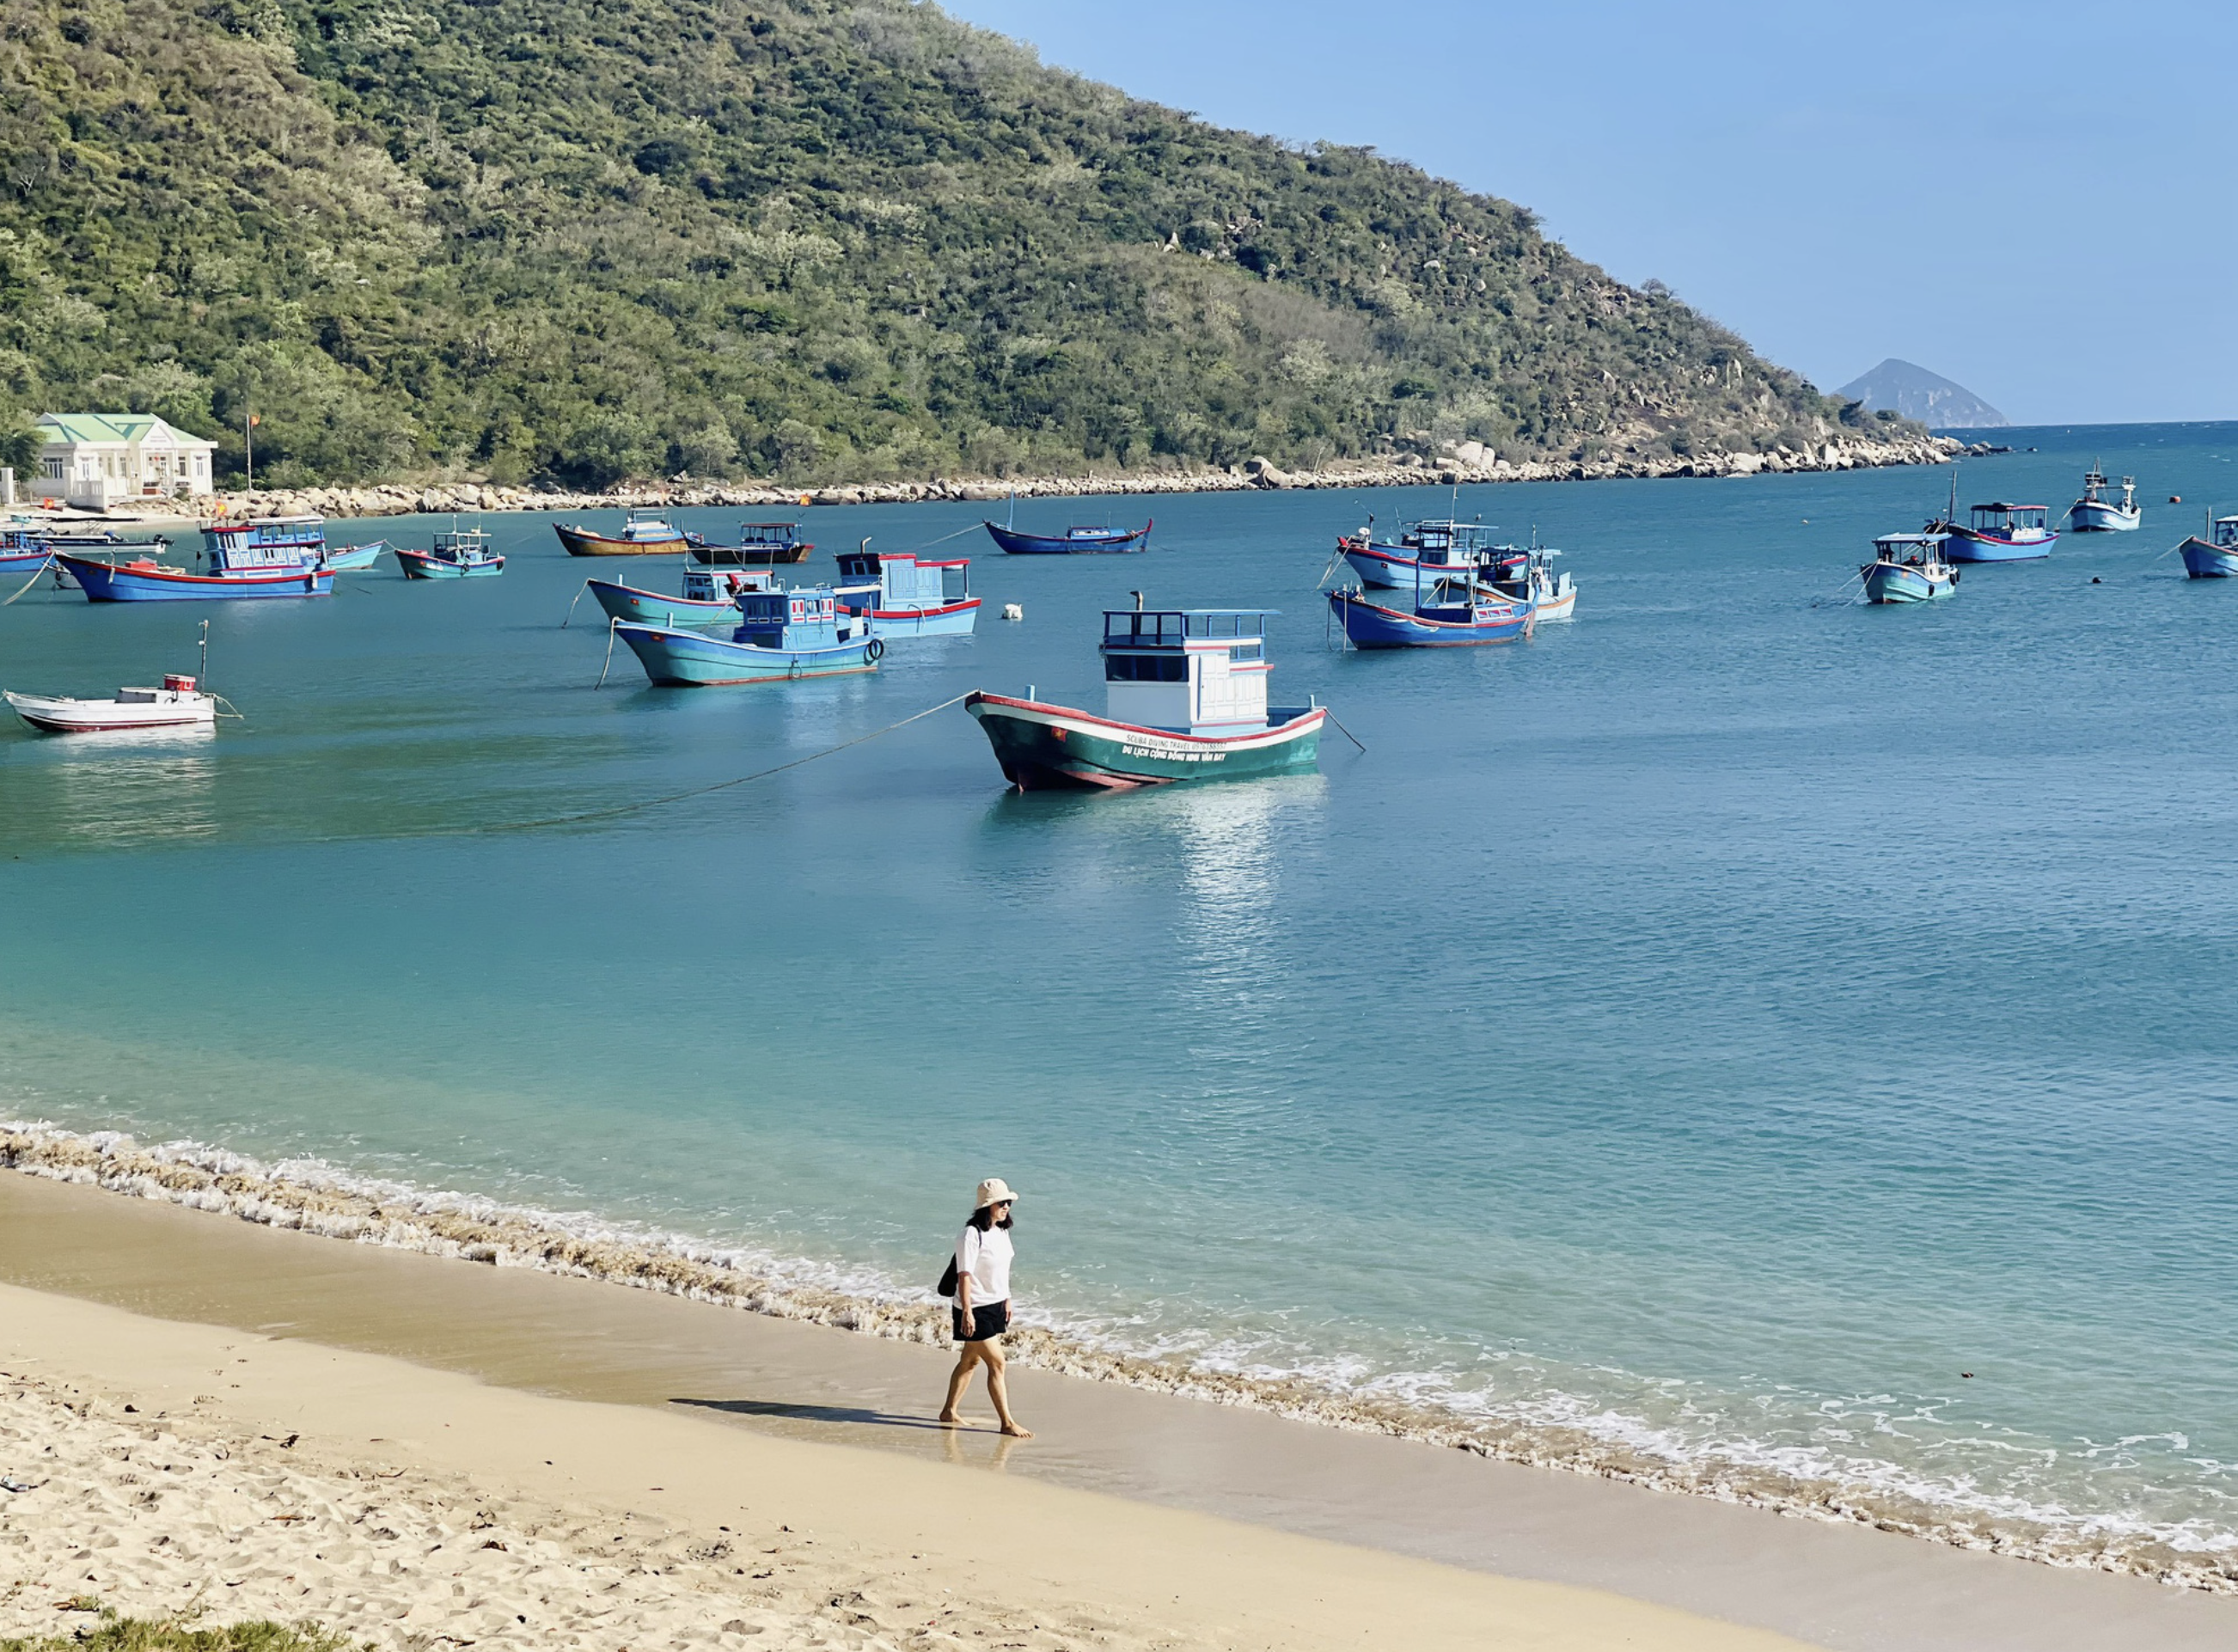 The charming beach in Ninh Van fishing village in Khanh Hoa Province, south-central Vietnam. Photo: Thien Le